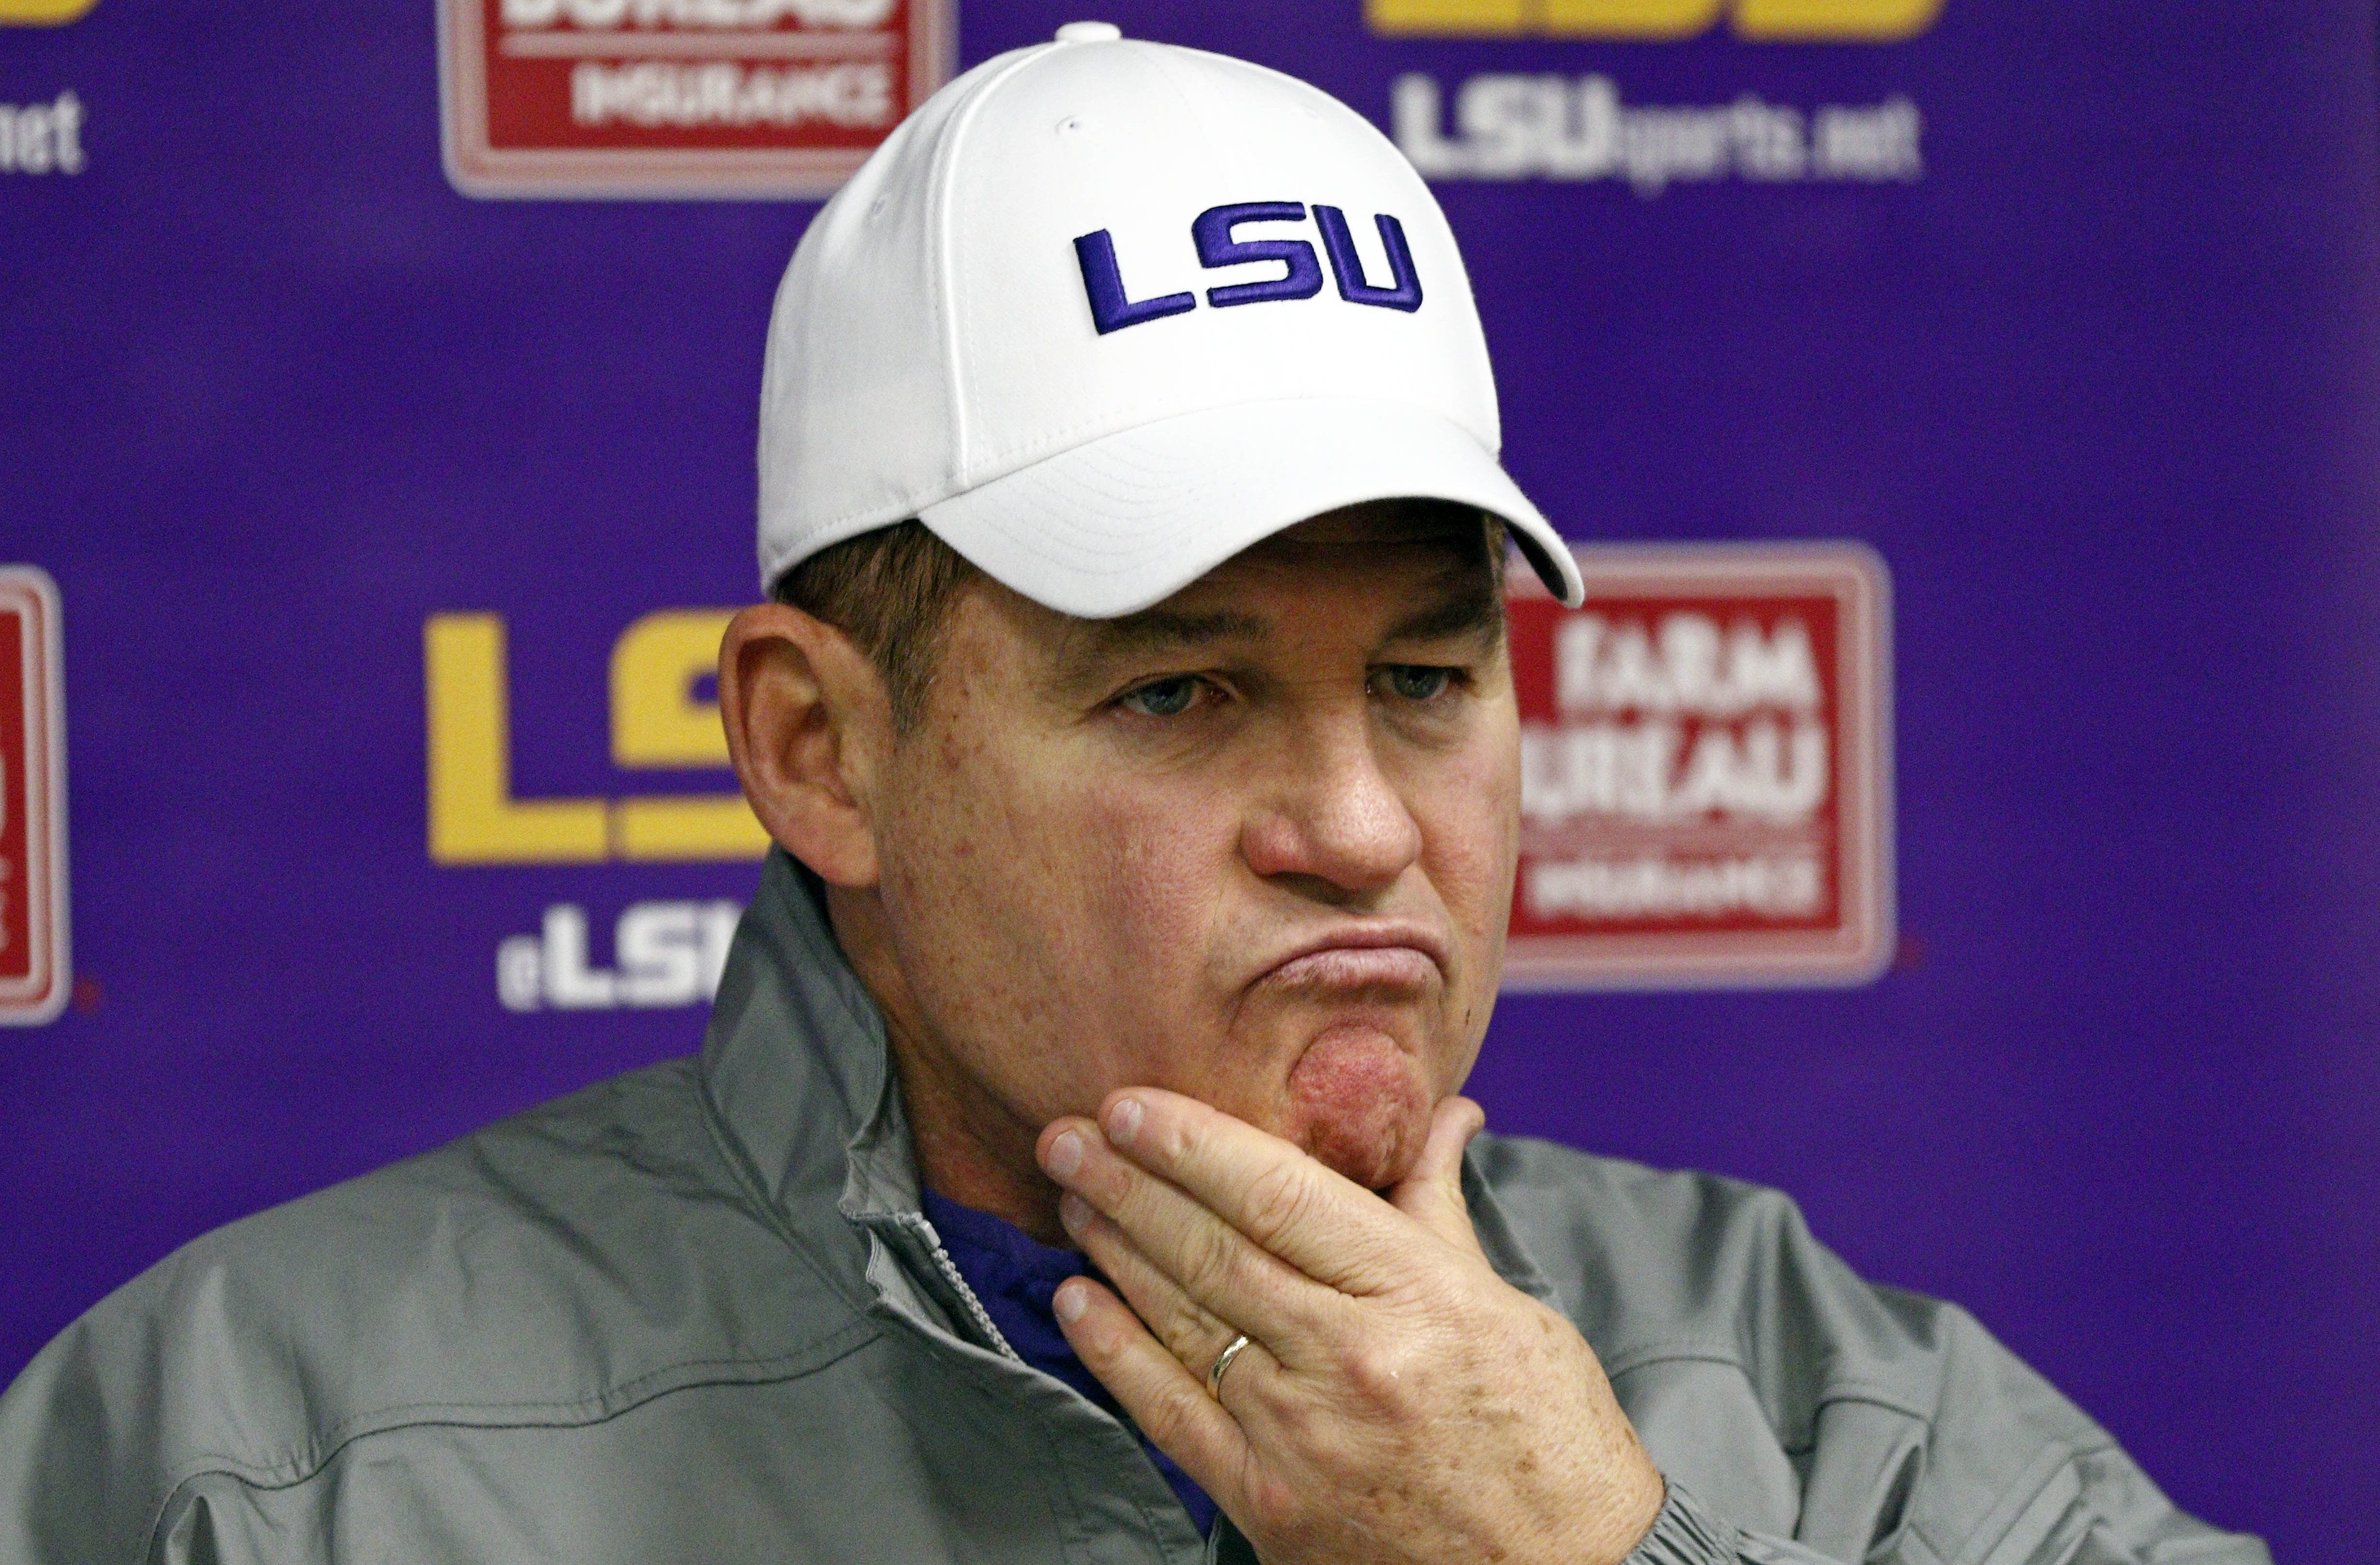 Miles served as LSU’s head football coach from 2005 to 2016.